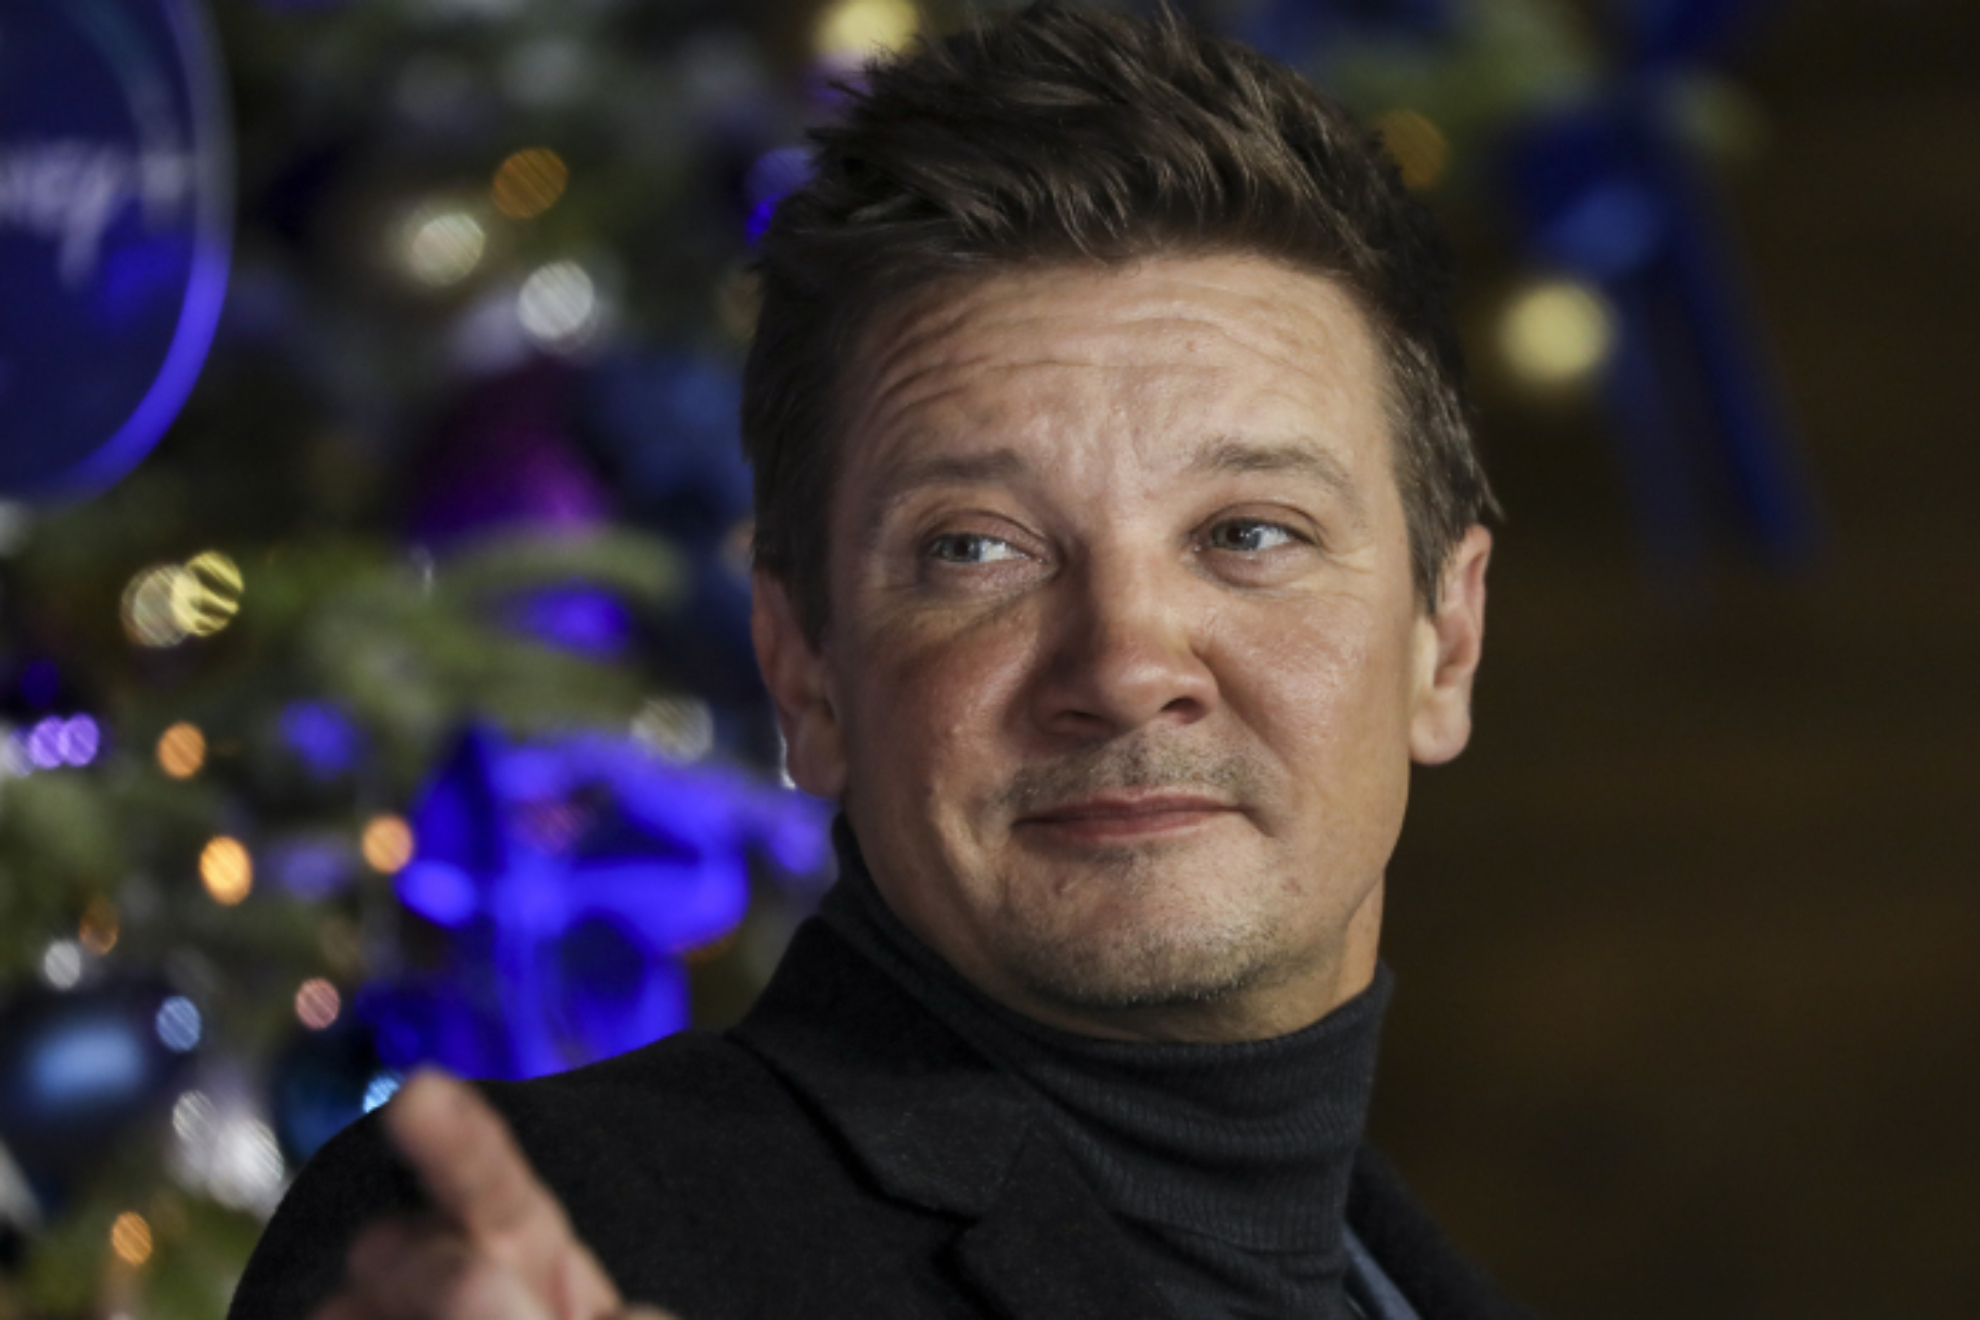 Jeremy Renner returns to acting after serious accident that broke 38 bones